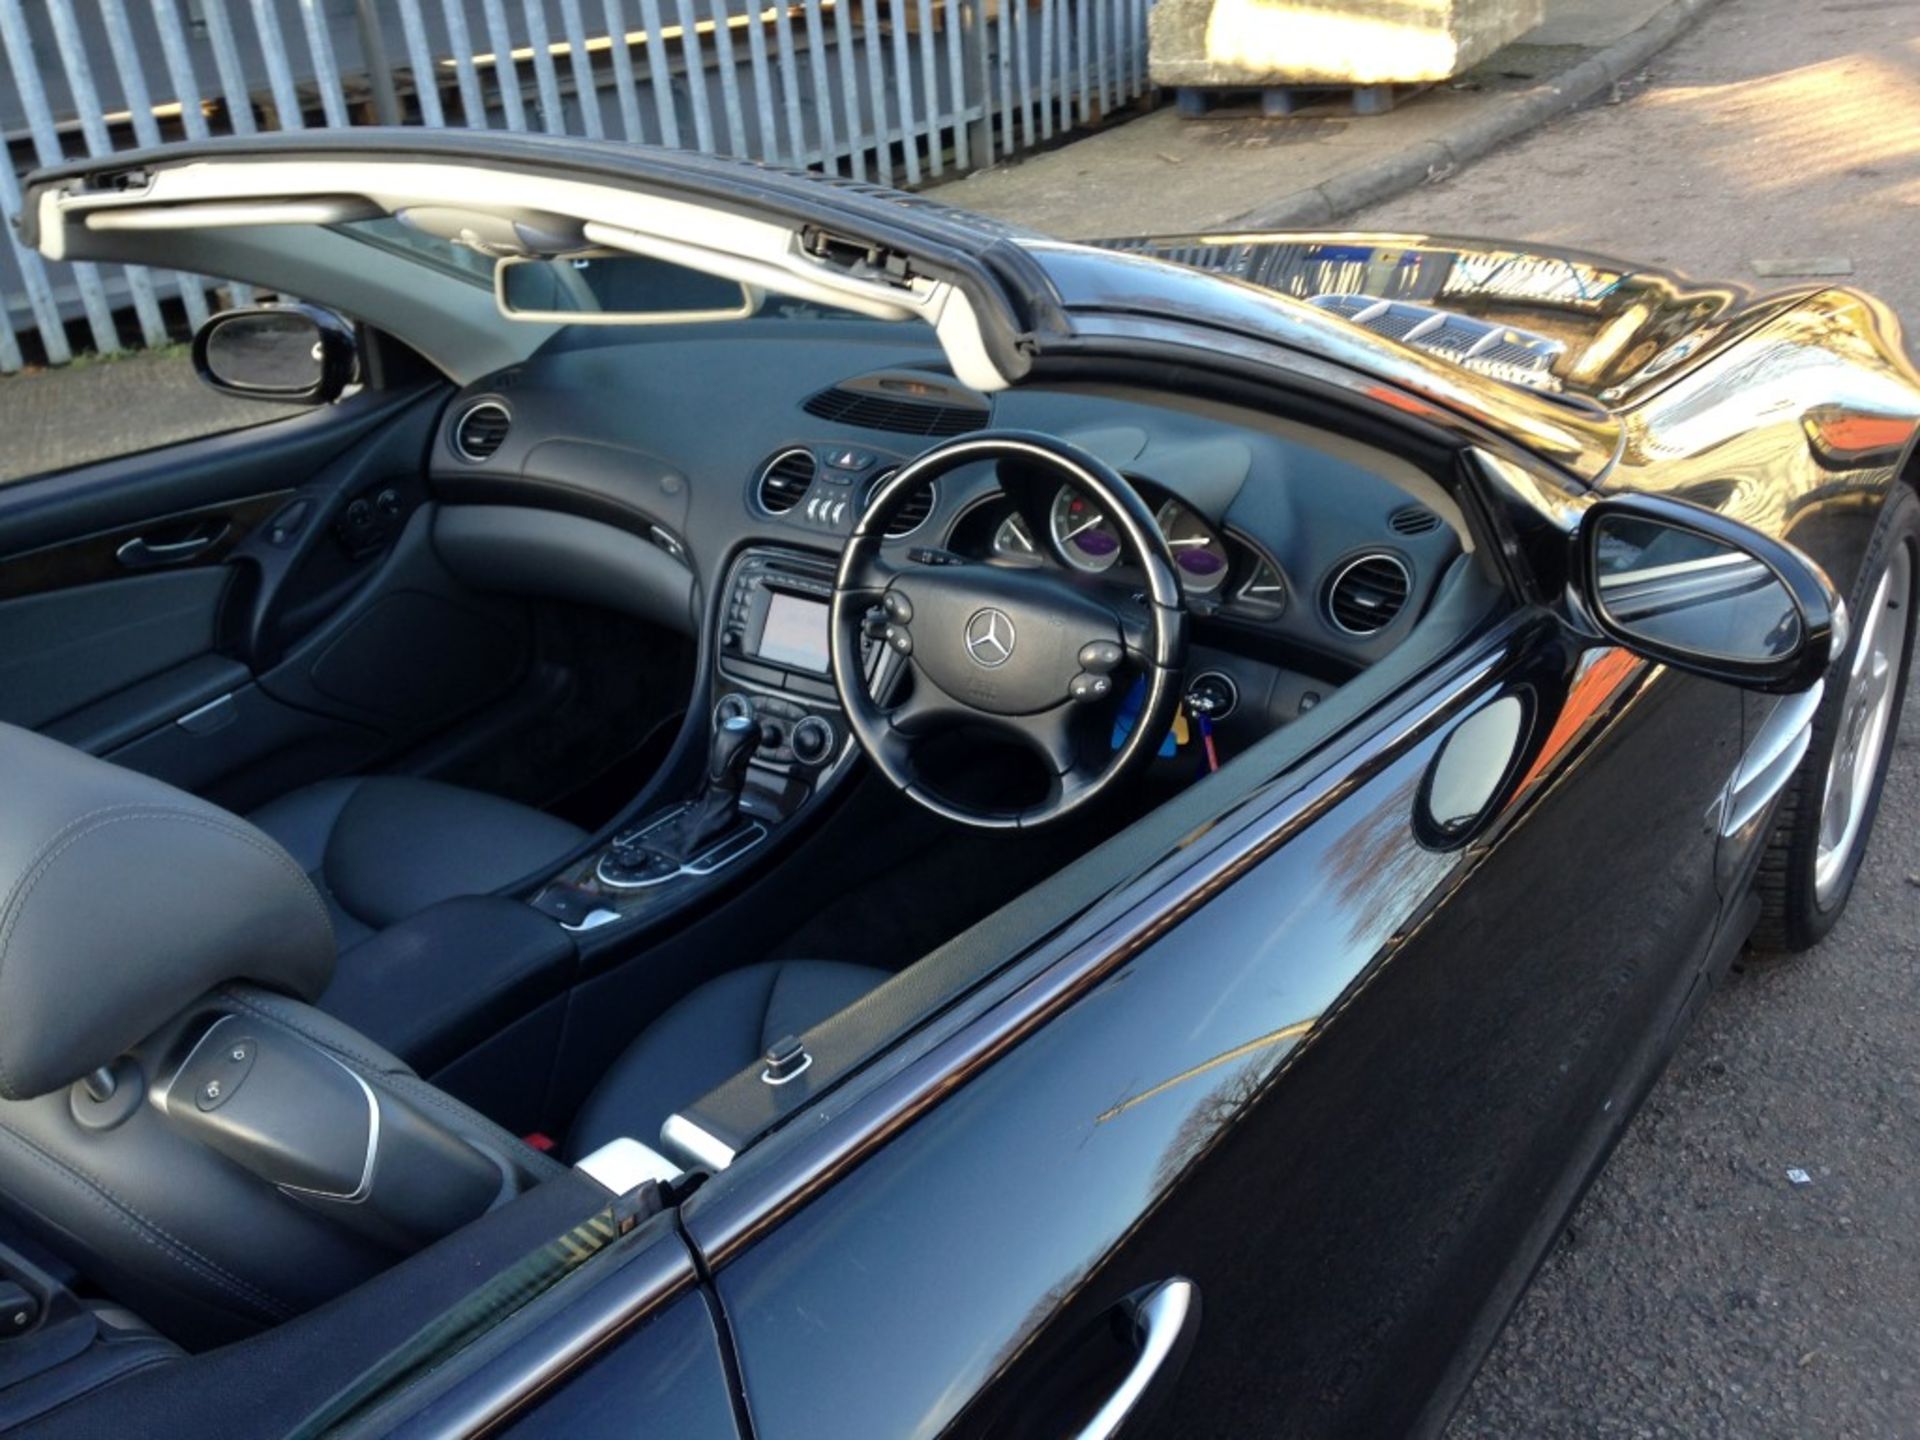 1 x Mercedes SL500 Automatic 5.0 Convertible - Petrol - Year 2002 - 94,500 Miles - Long MOT Expiry - Image 18 of 31